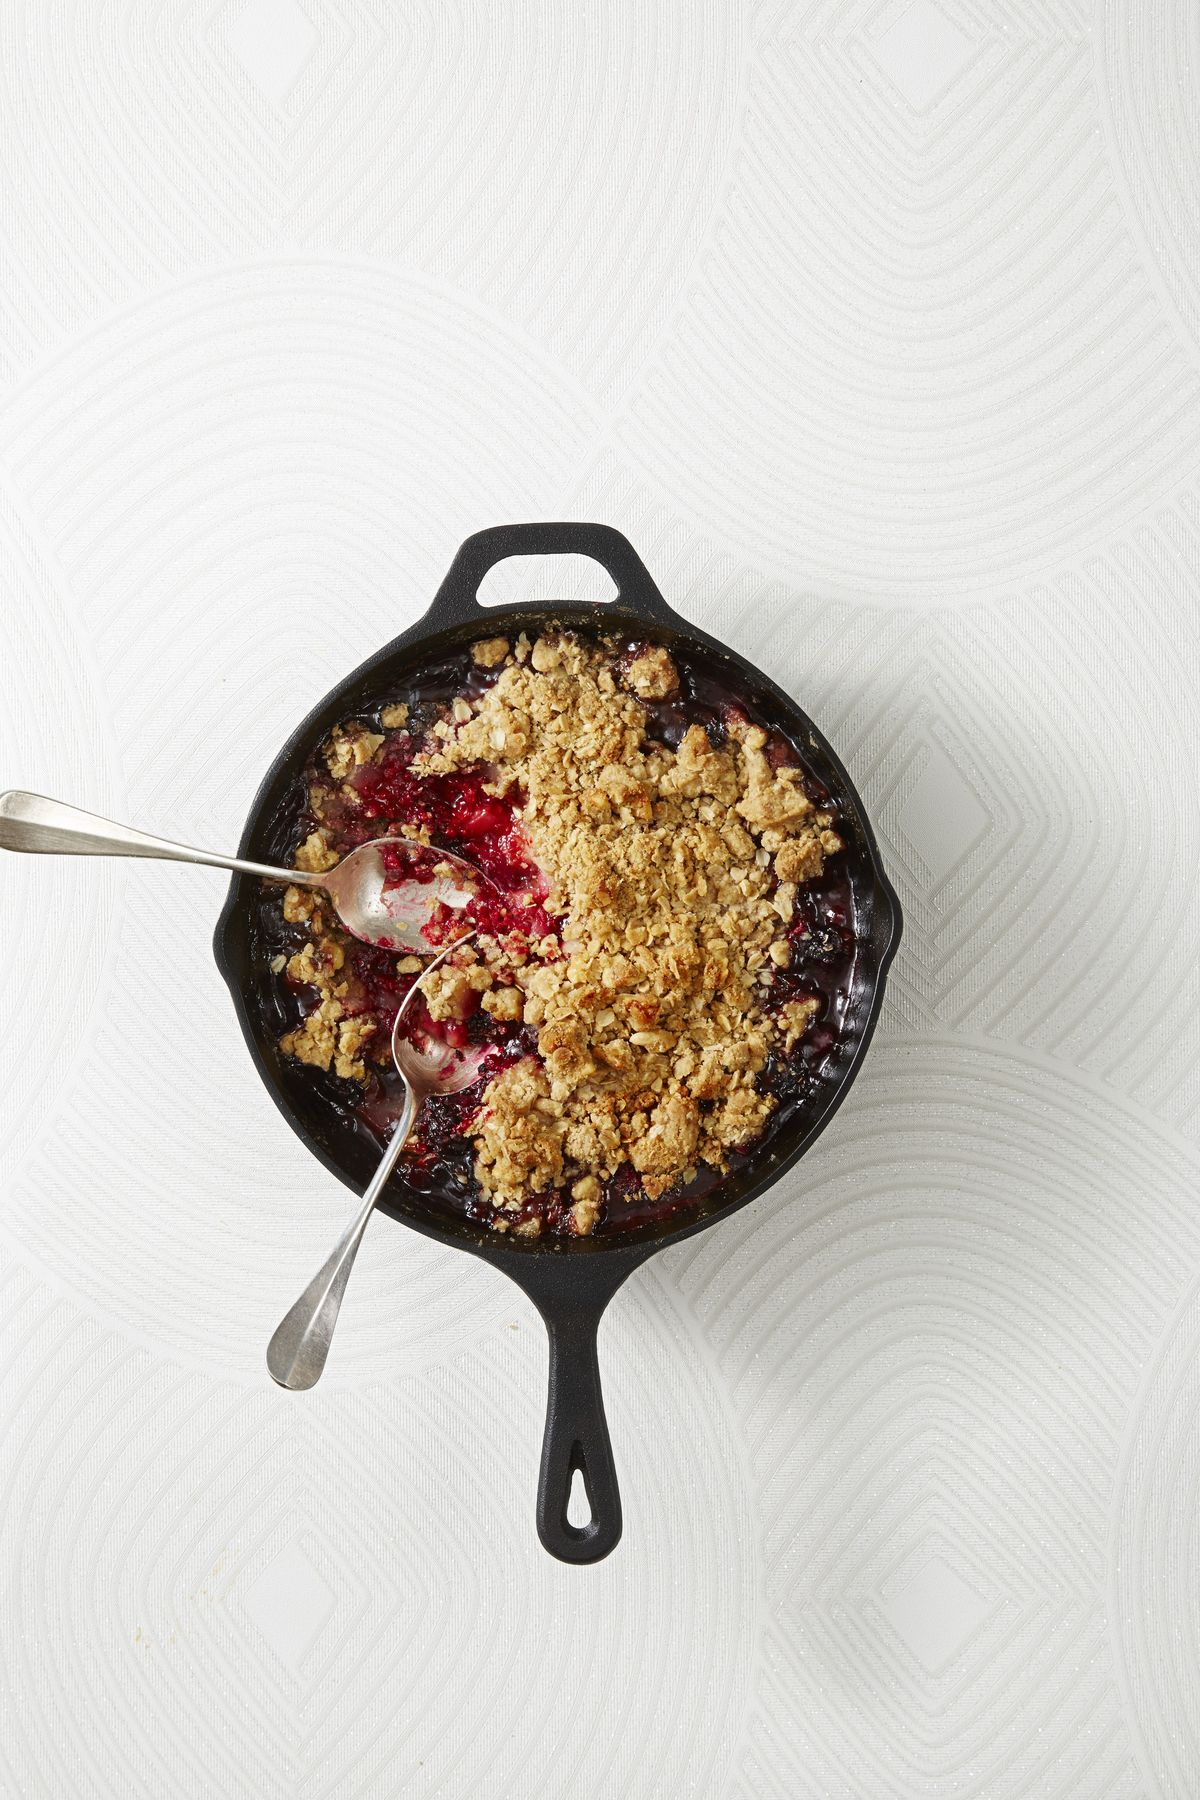 spiced pear and berry crumble in a cast iron pan